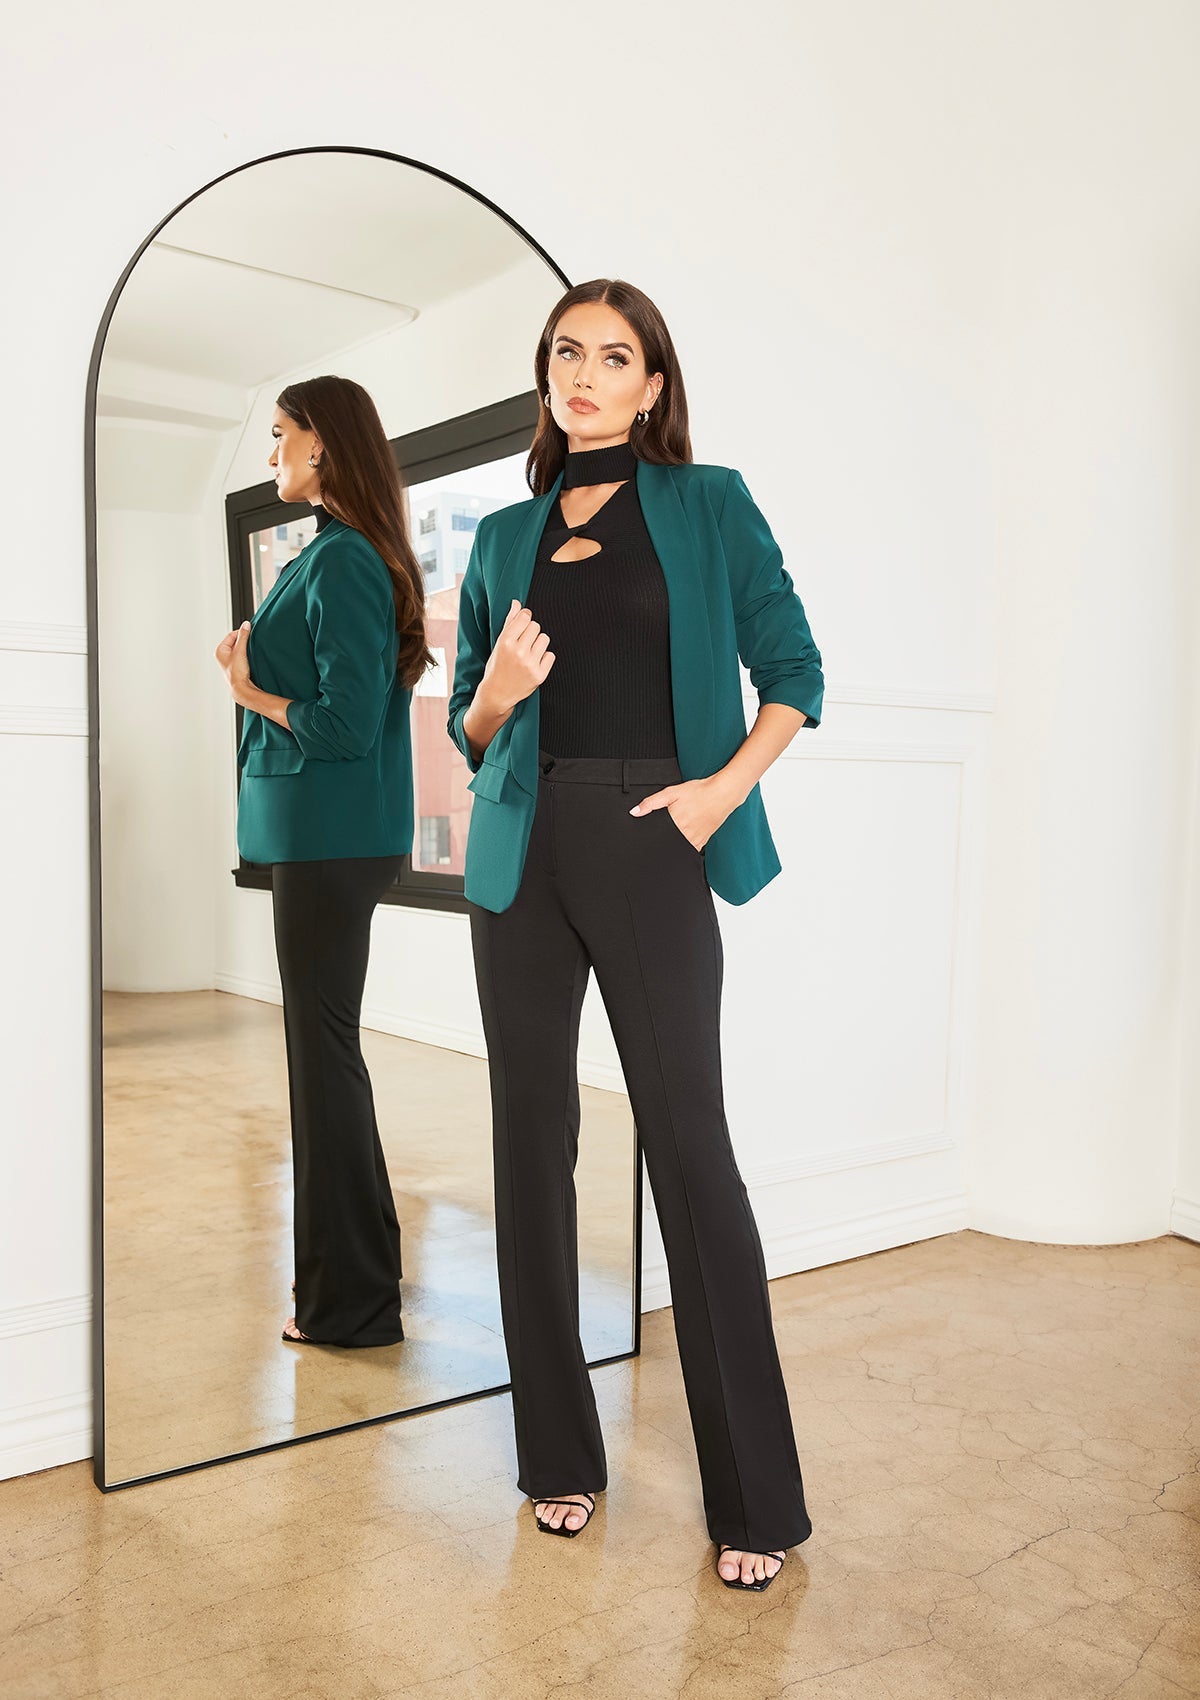 Formal Pantsuit for Business Women, Tall Women Pants and Blazer